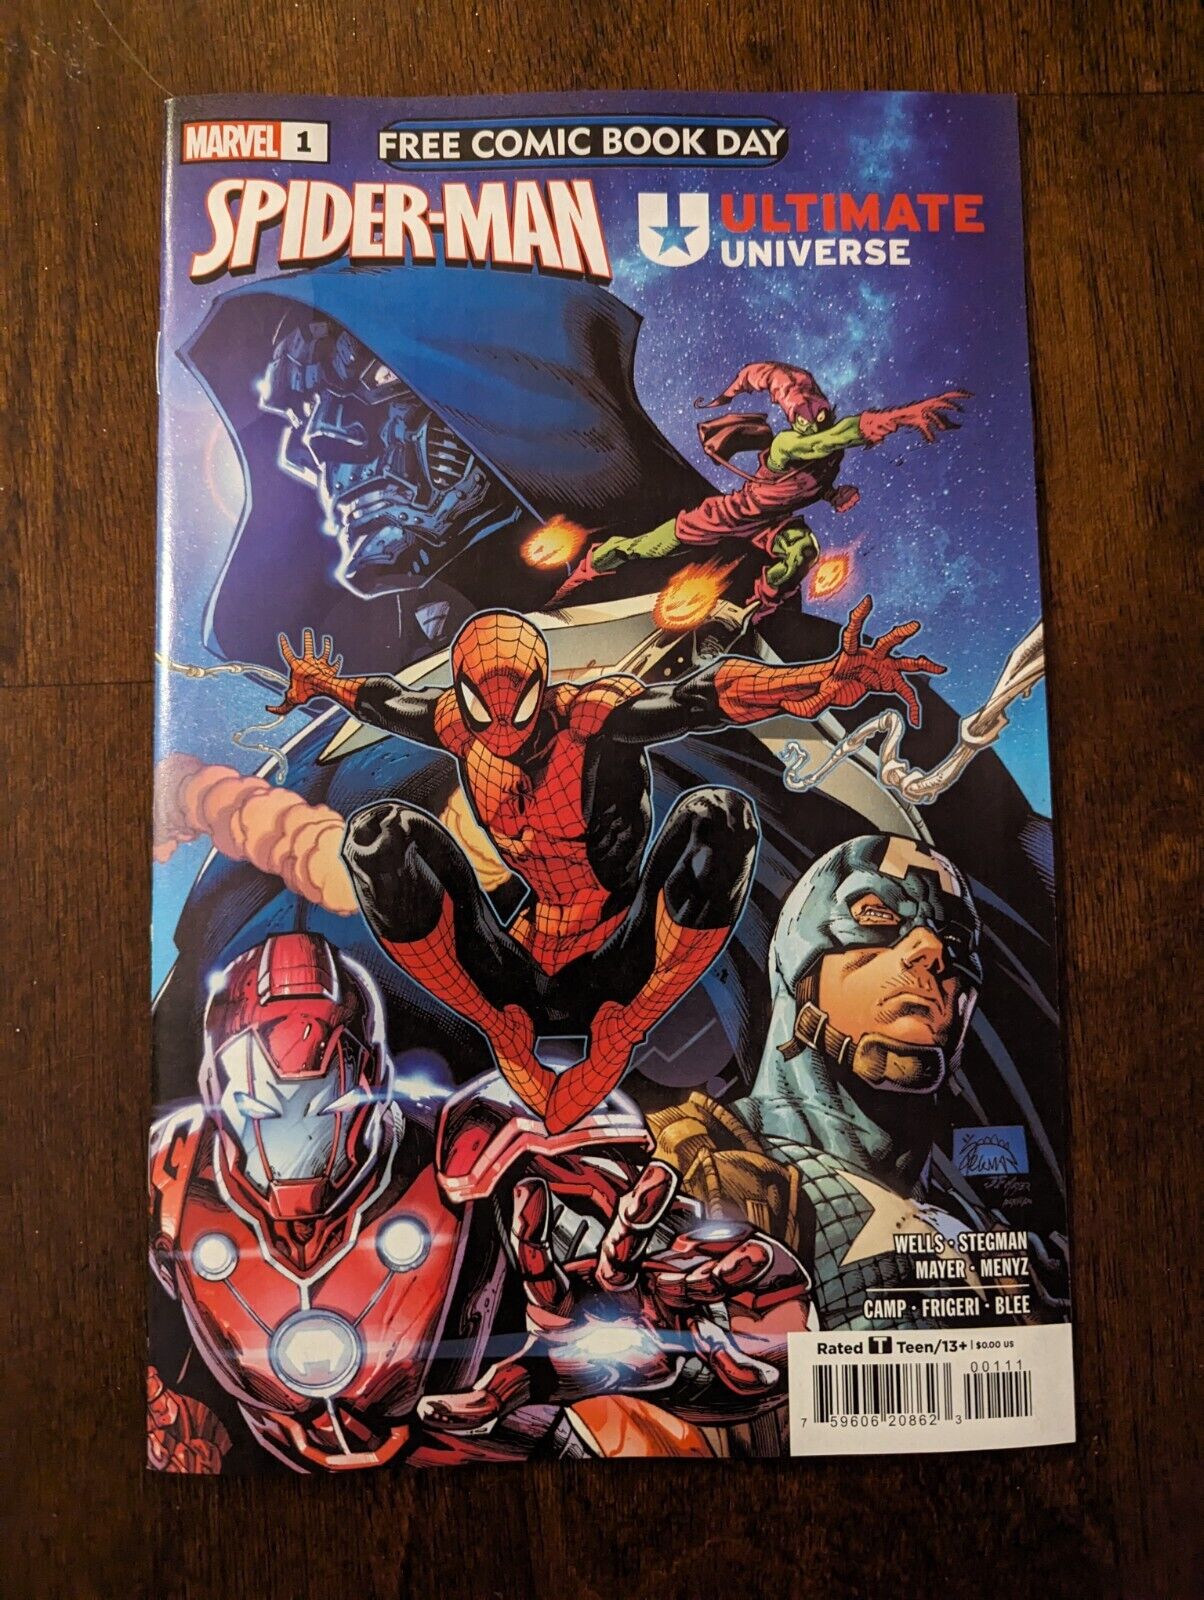 ULTIMATE UNIVERSE / SPIDER-MAN #1 FREE COMIC BOOK DAY 2024 NM/NM+ NO STAMP